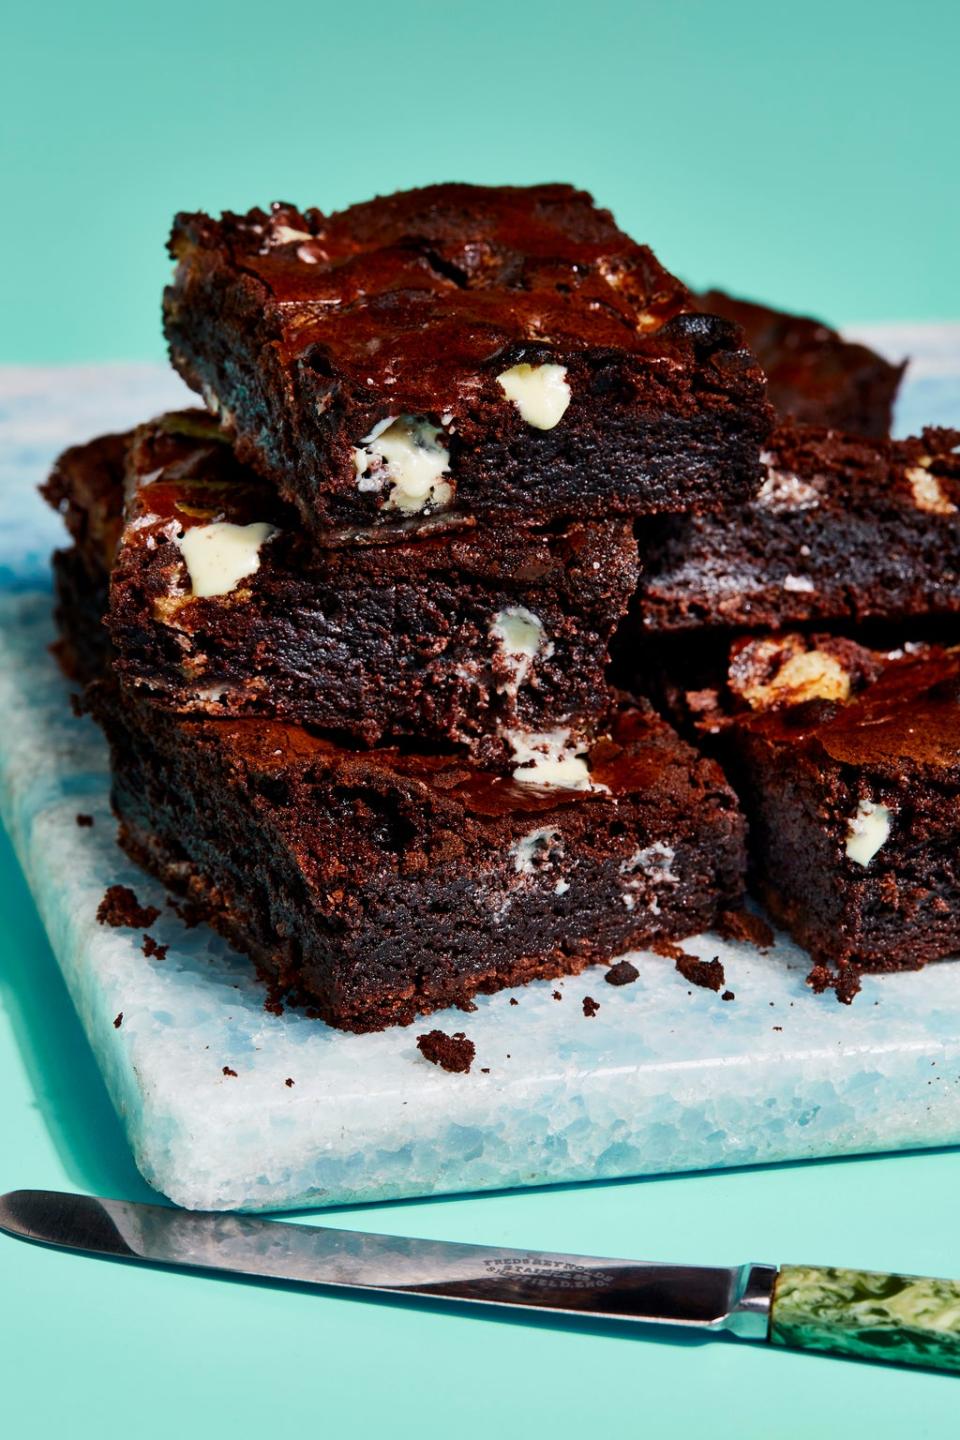 Eat these brownies warm with a scoop of ice cream (PA)